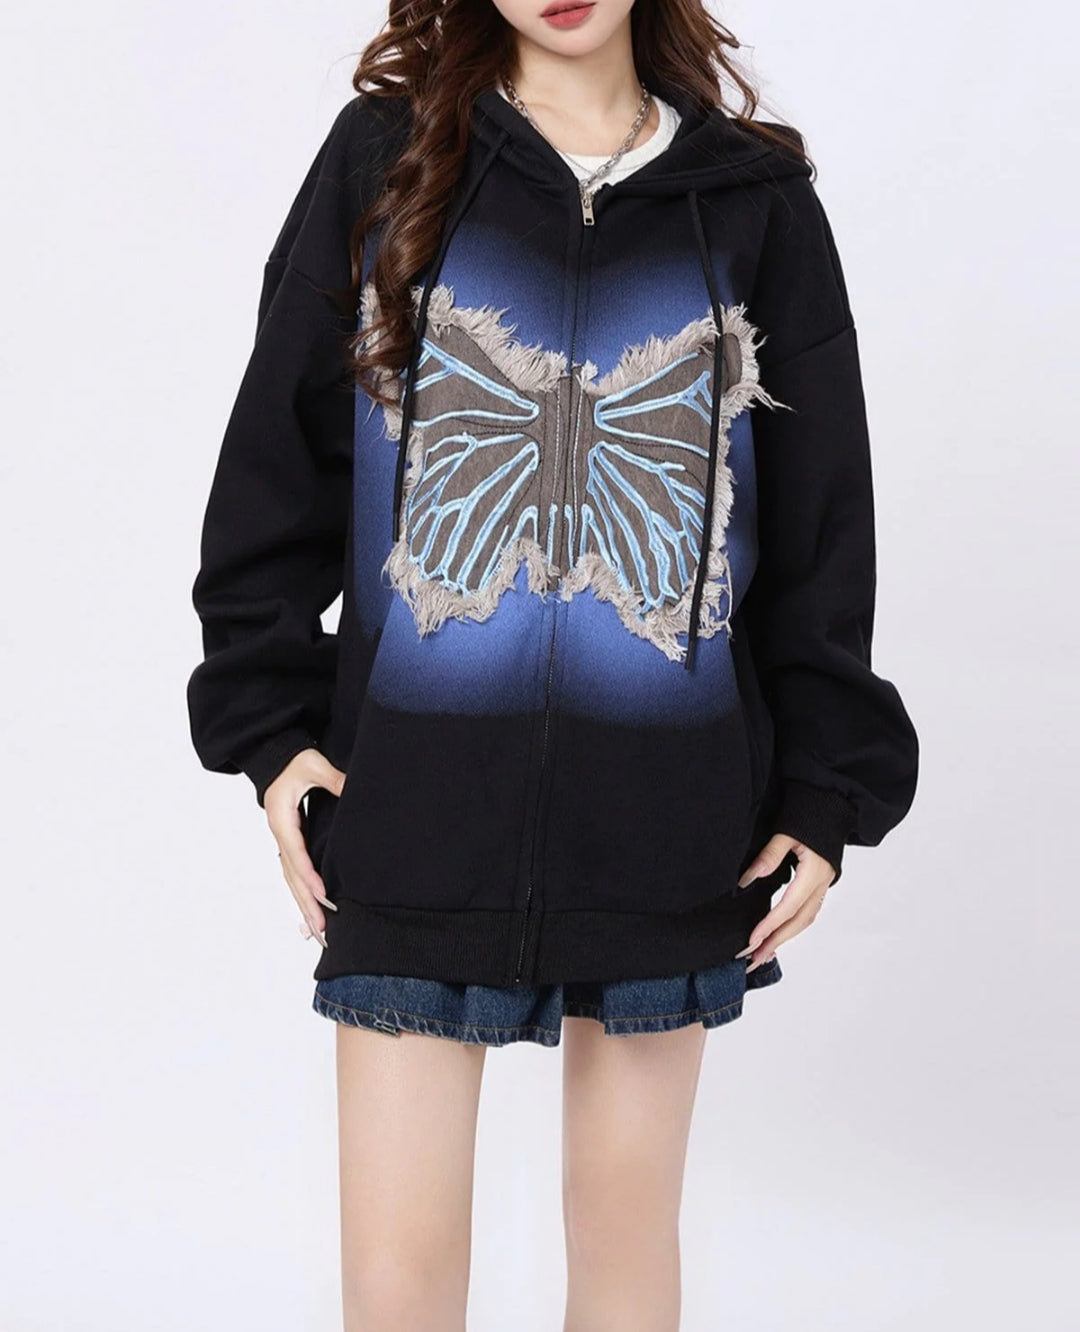 Butterfly Patch Cardigan Hoodie